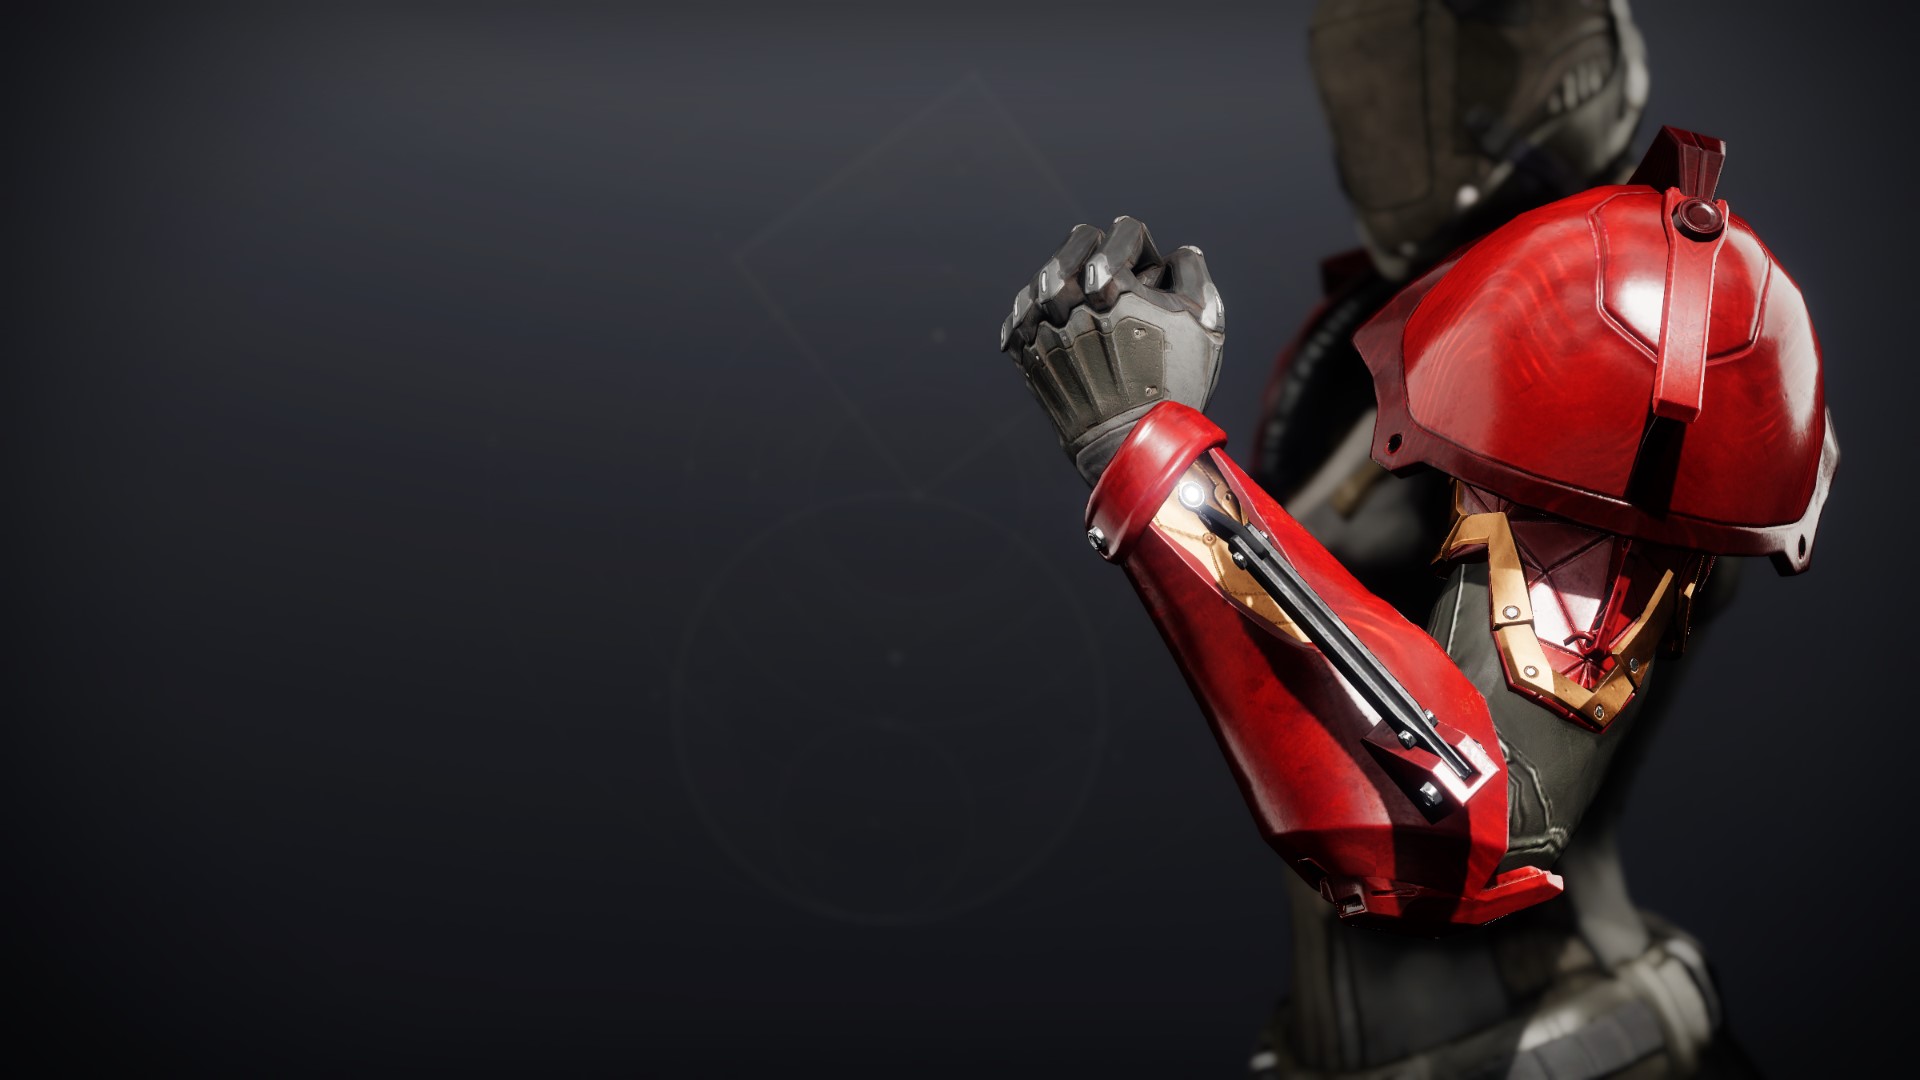 An in-game render of the Forged Machinist Gauntlets.